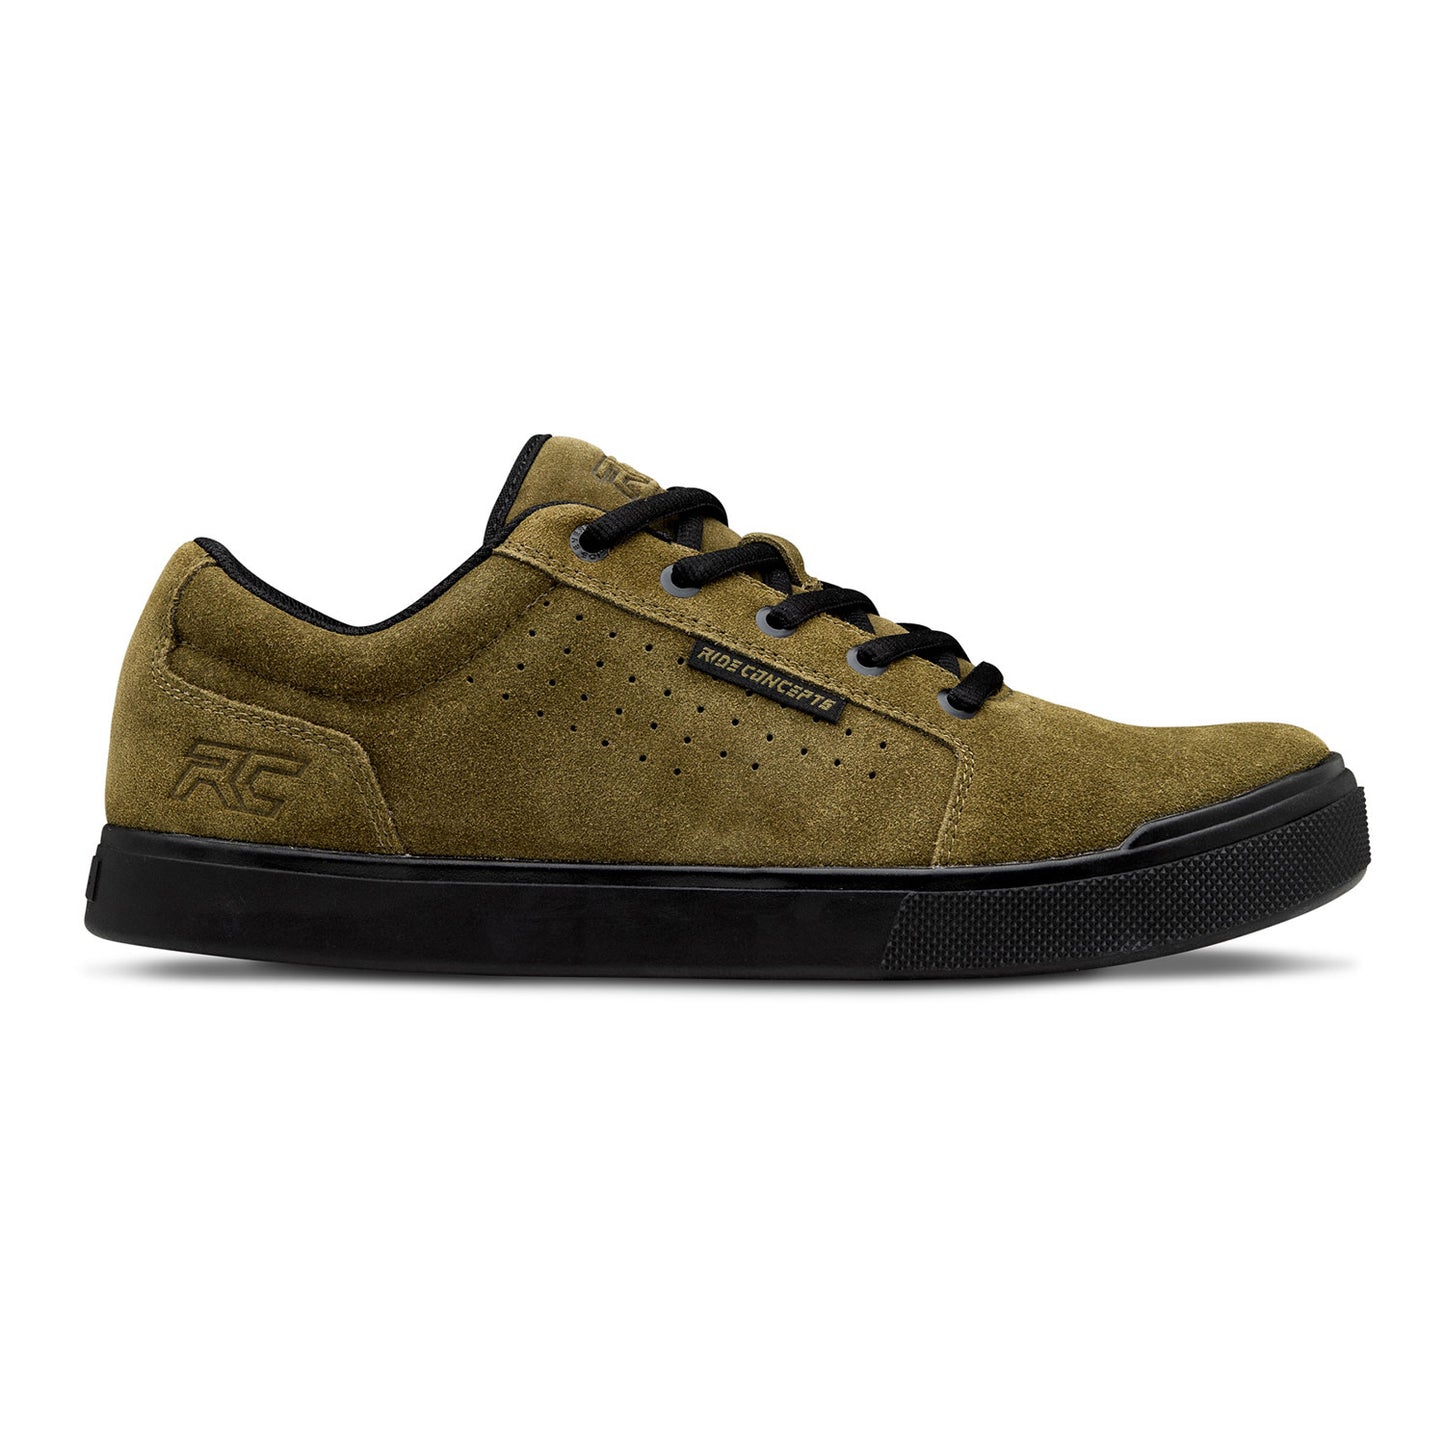 Ride Concepts Vice Flat Shoes - US 10.0 - Olive